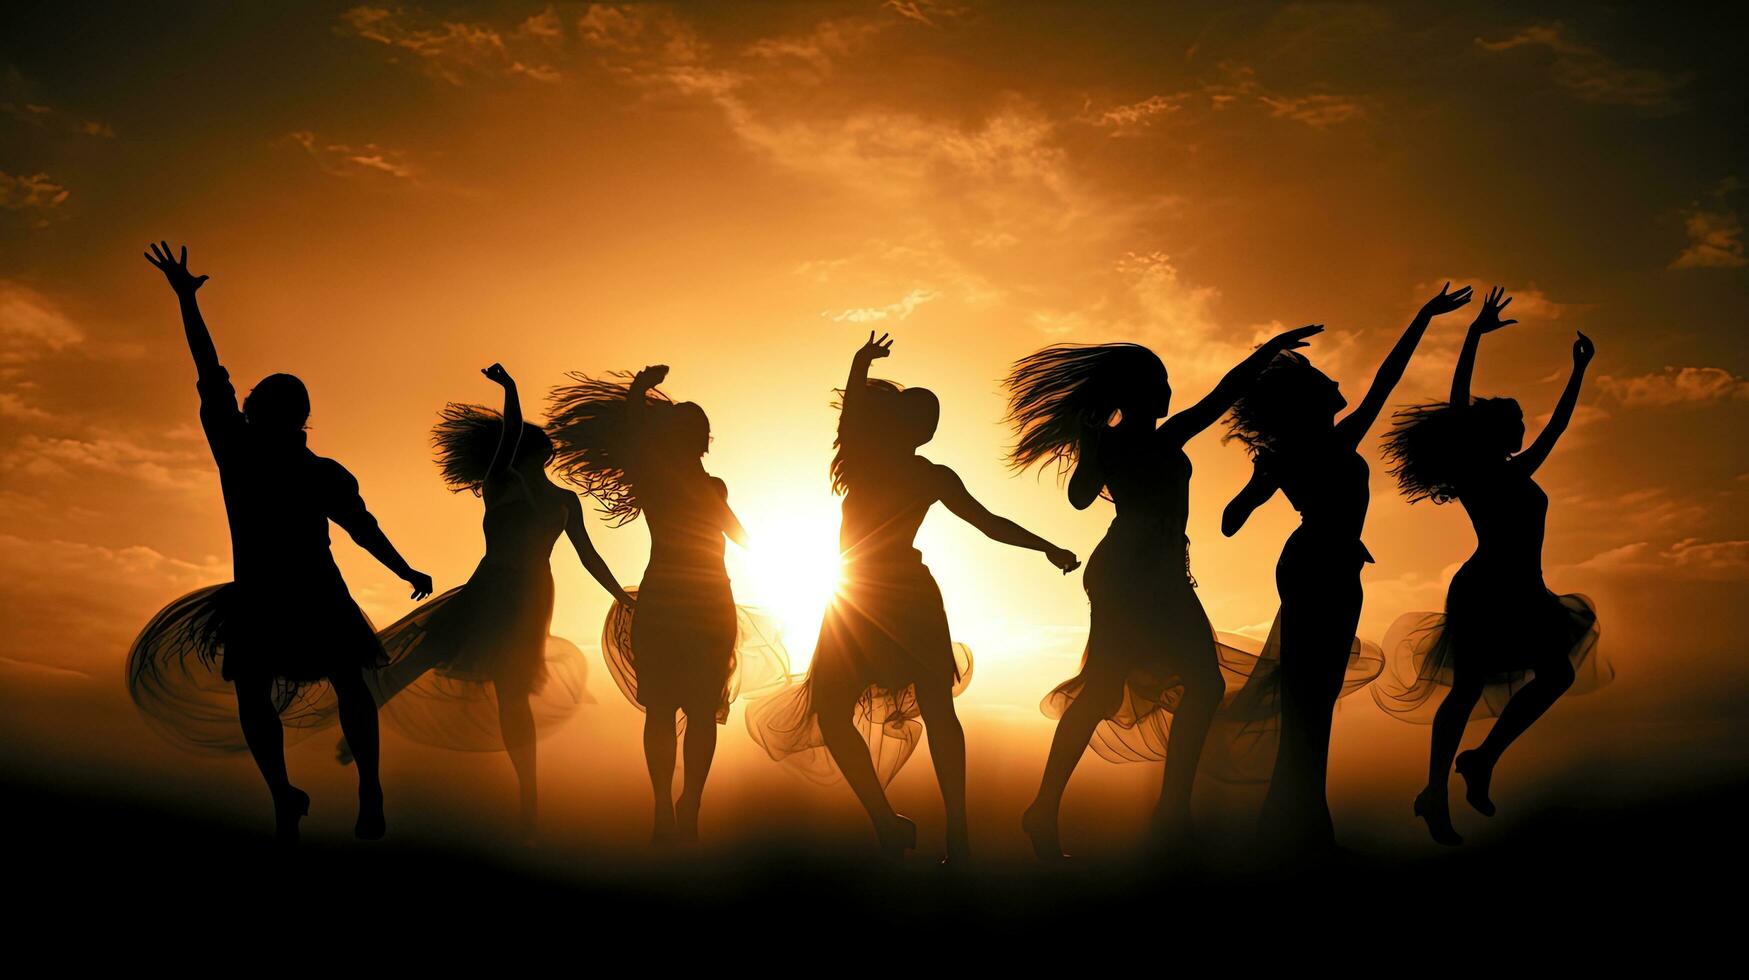 Silhouettes of people in dance photo